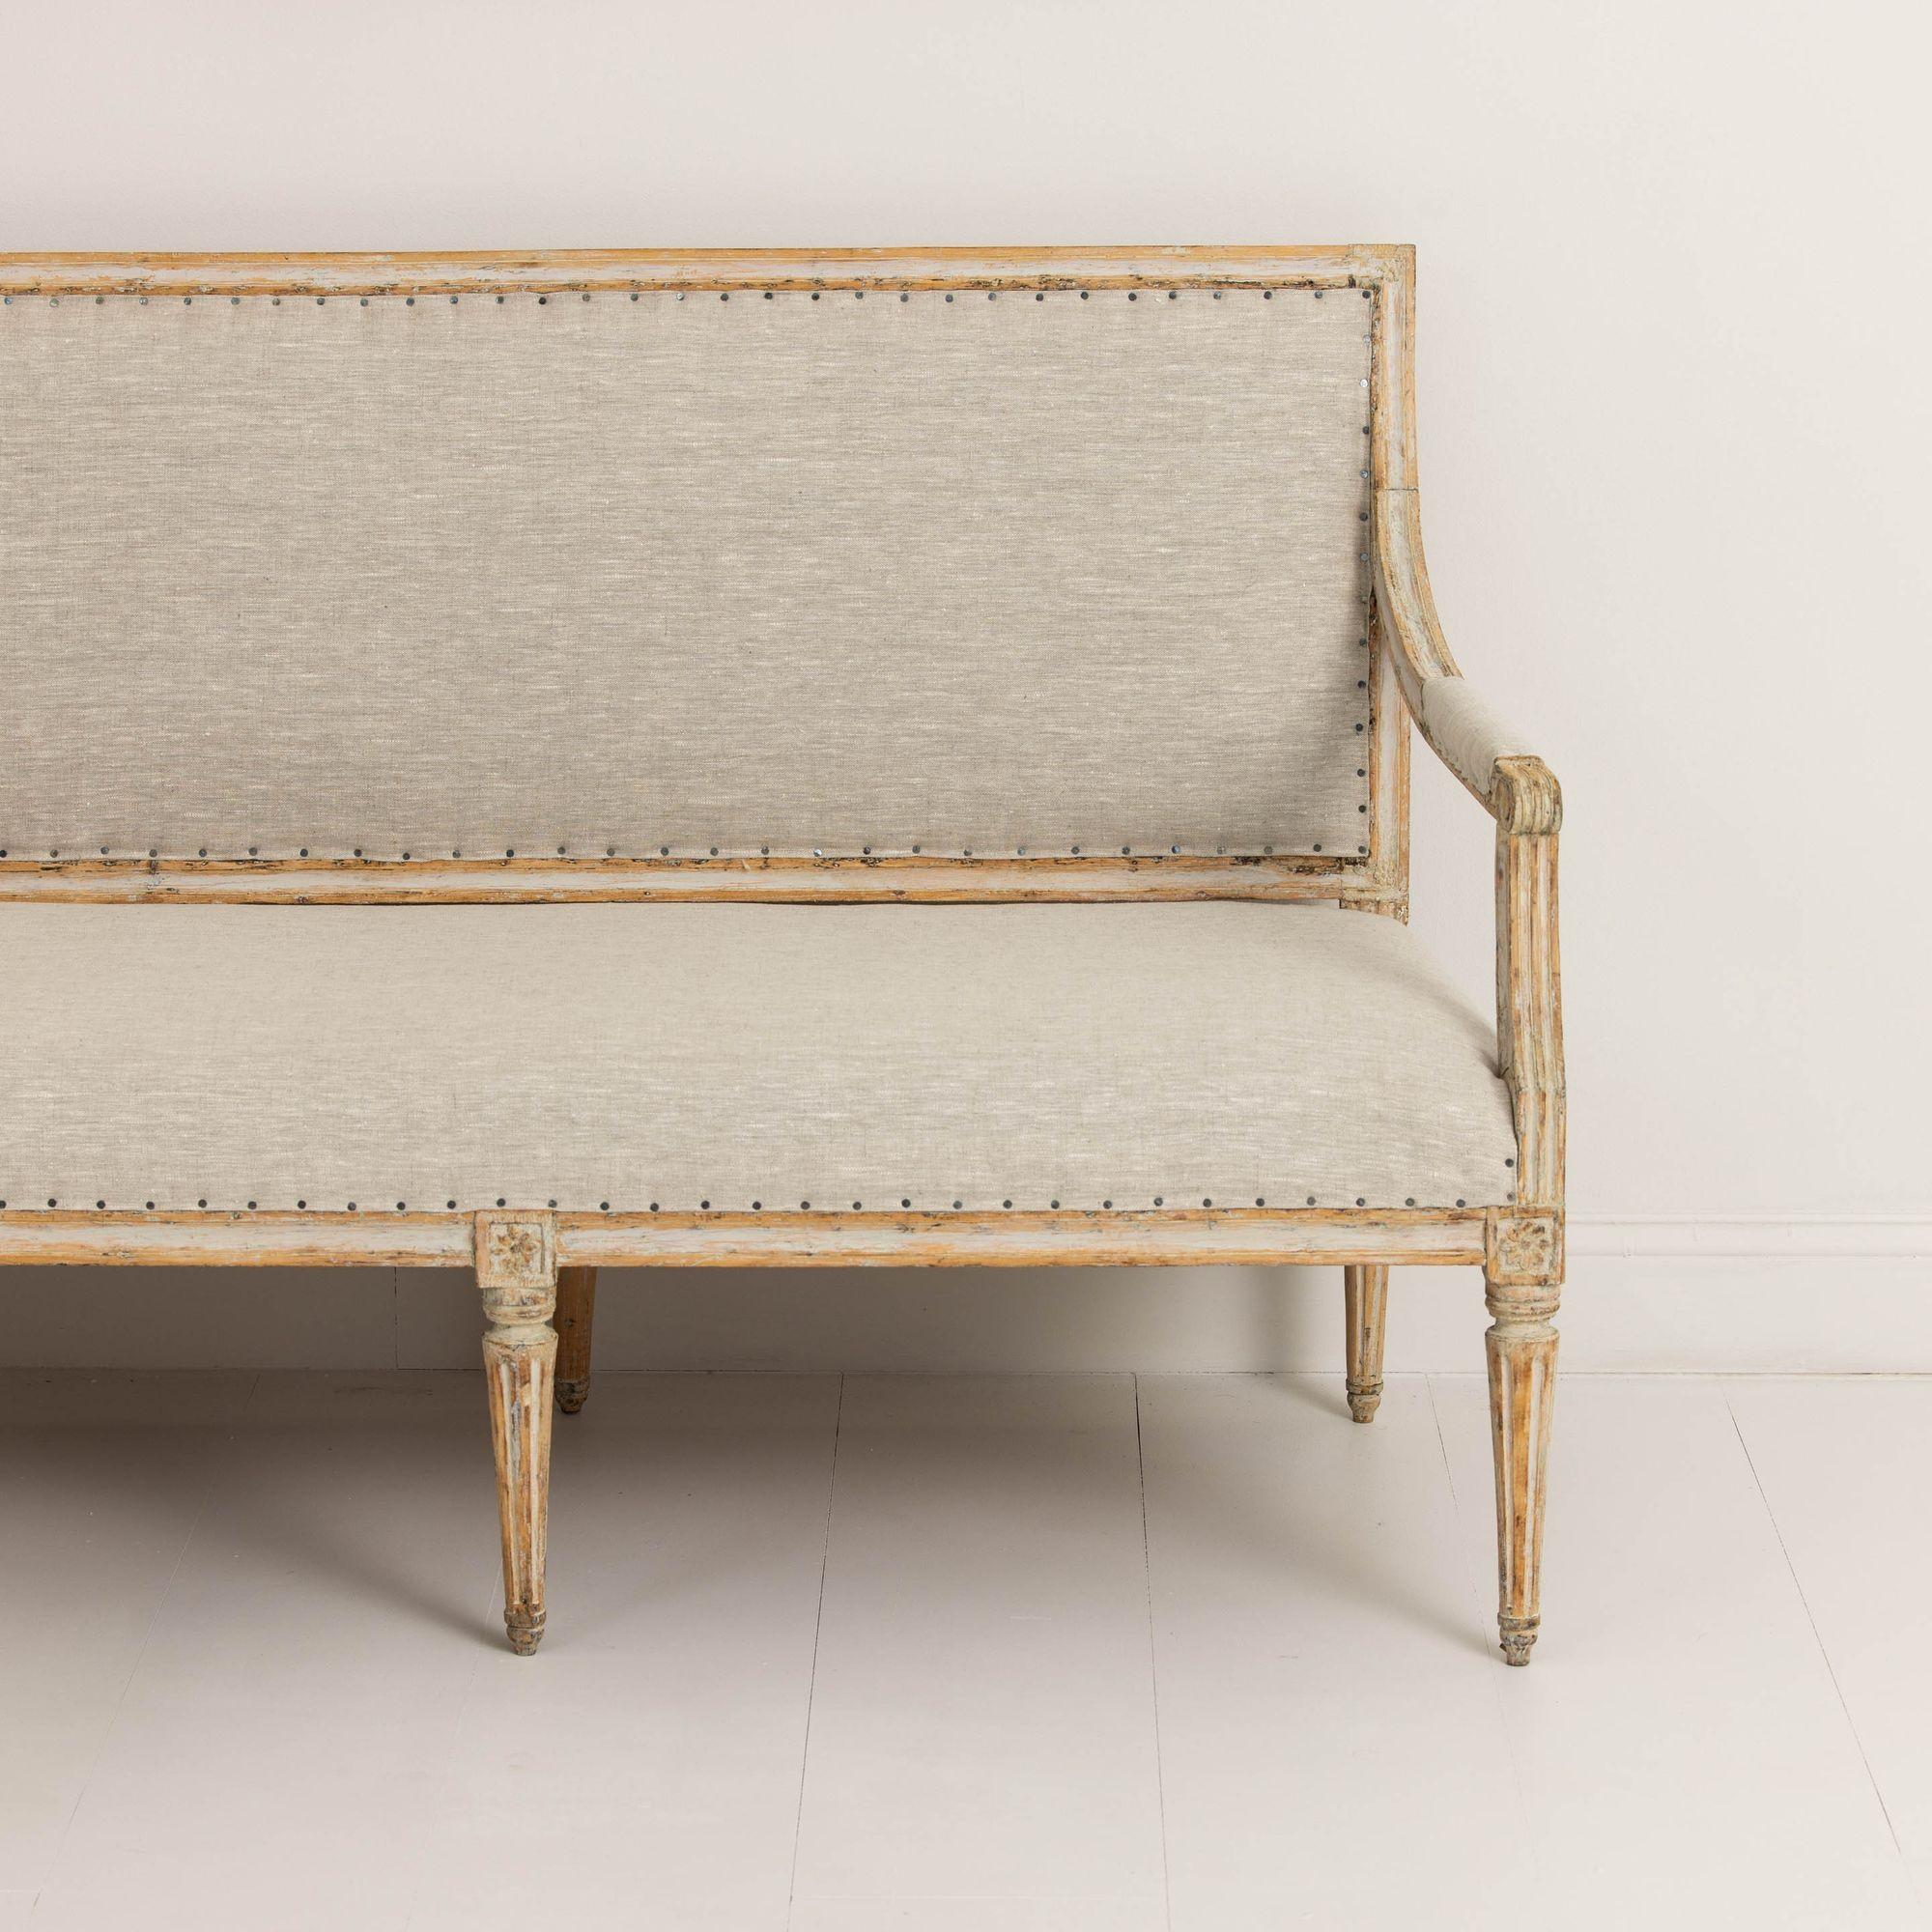 18th Century and Earlier 18th c. Swedish Gustavian Period Sofa in Original Paint By Johan Lindgren For Sale